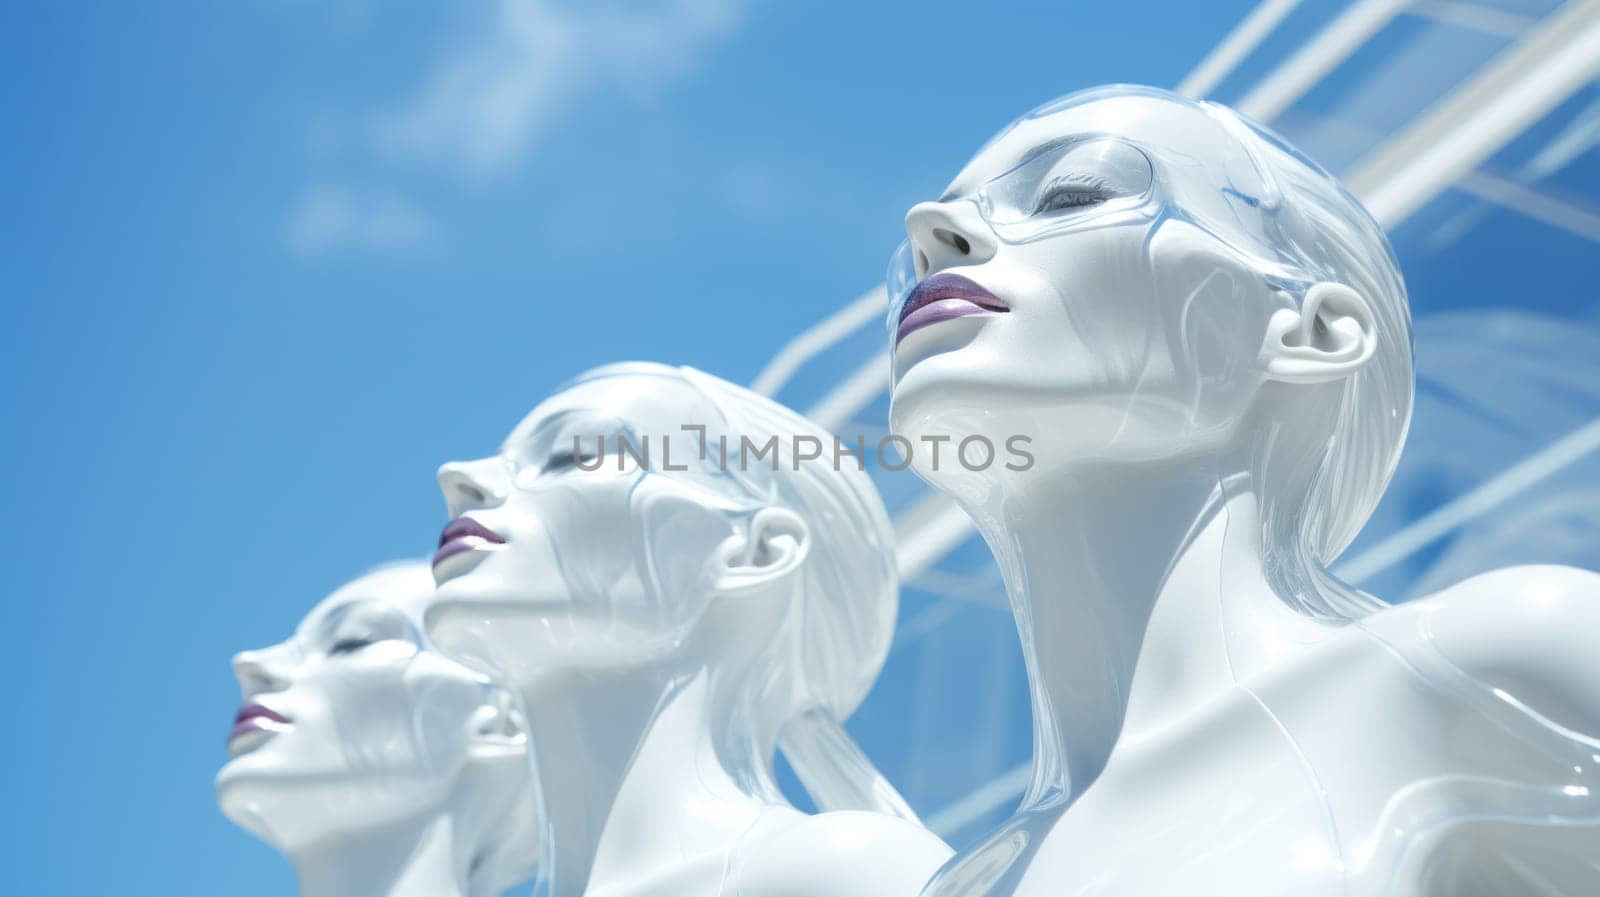 Three white mannequins with glasses standing next to each other